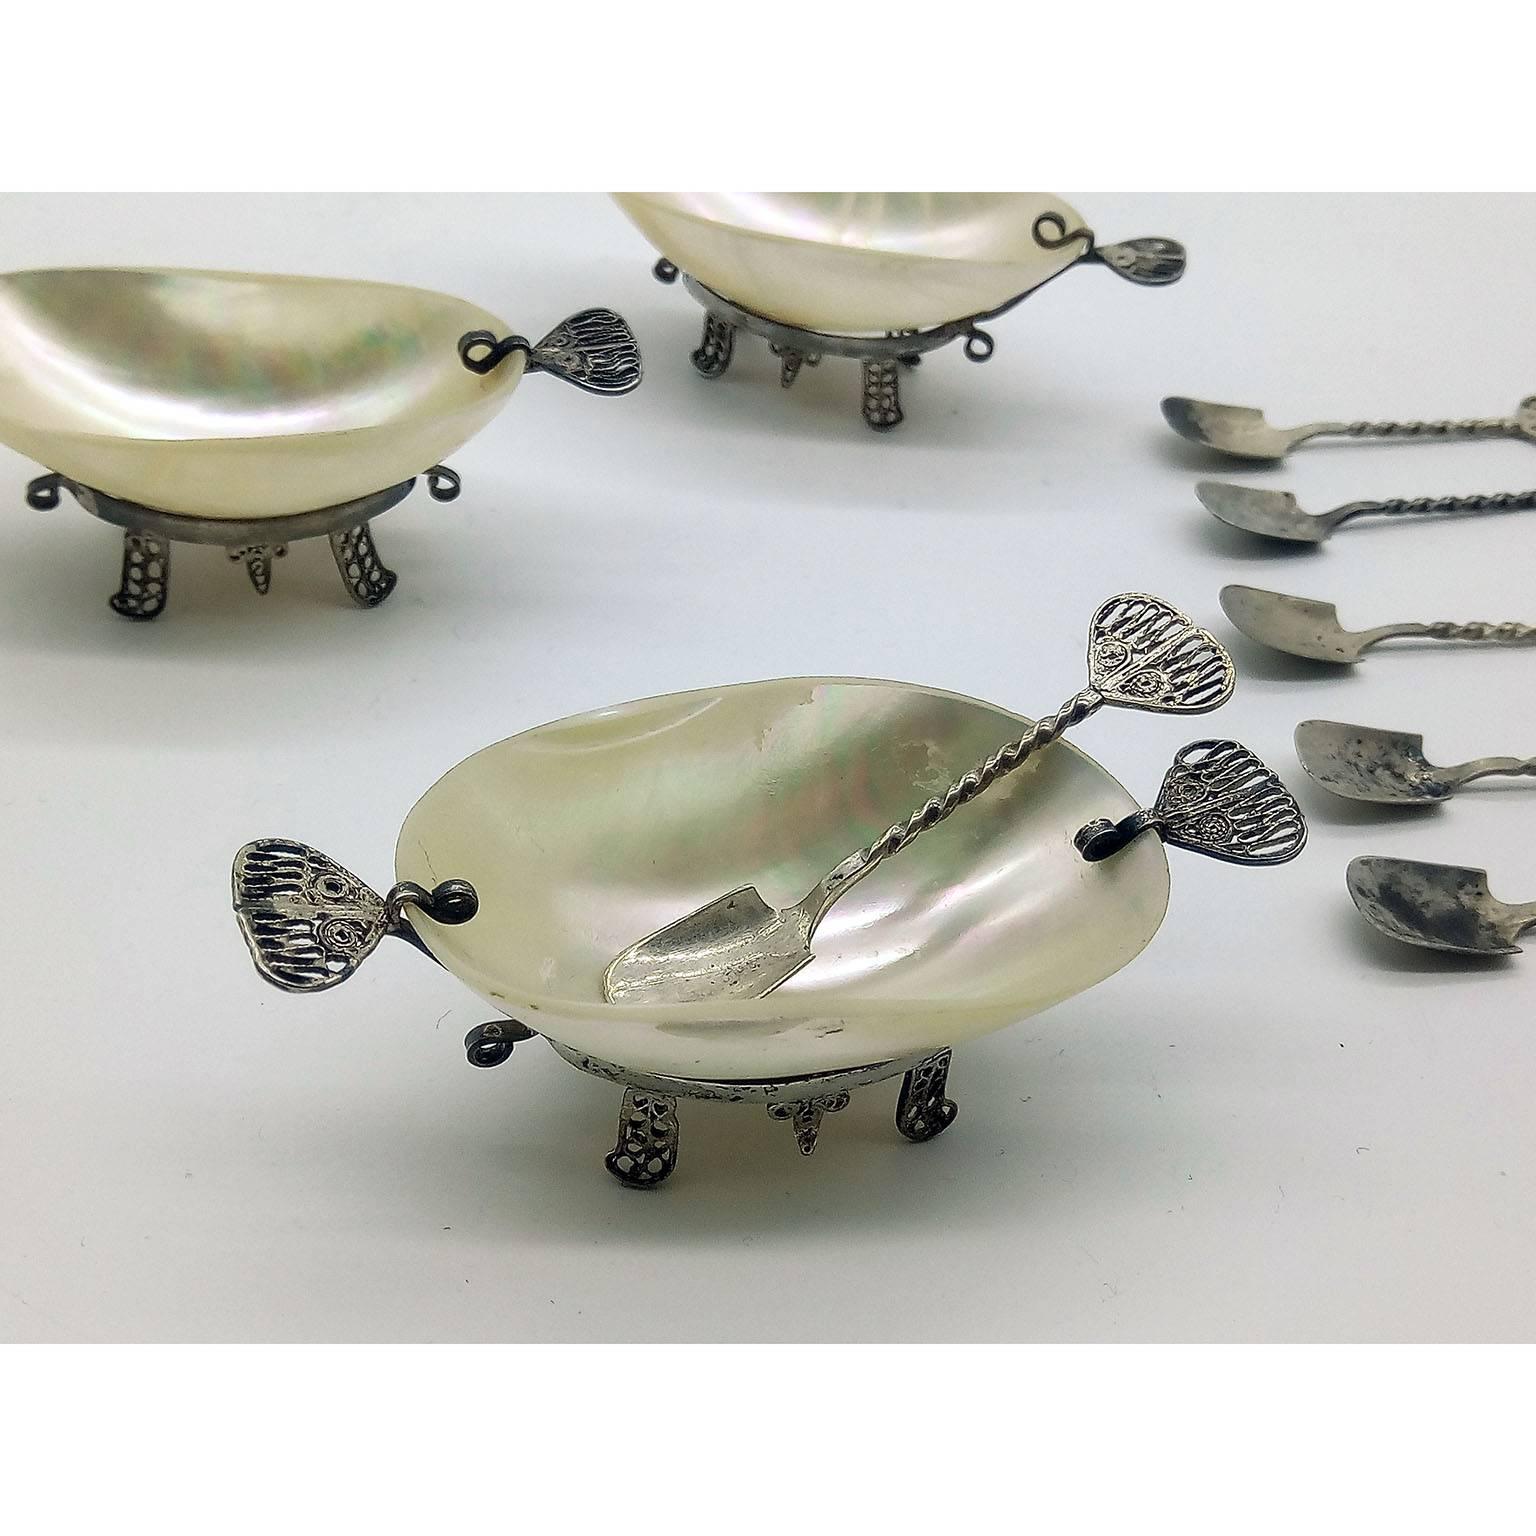 Very Rare Russian Caviar Servers in Mother-of-Pearl and Silver 1